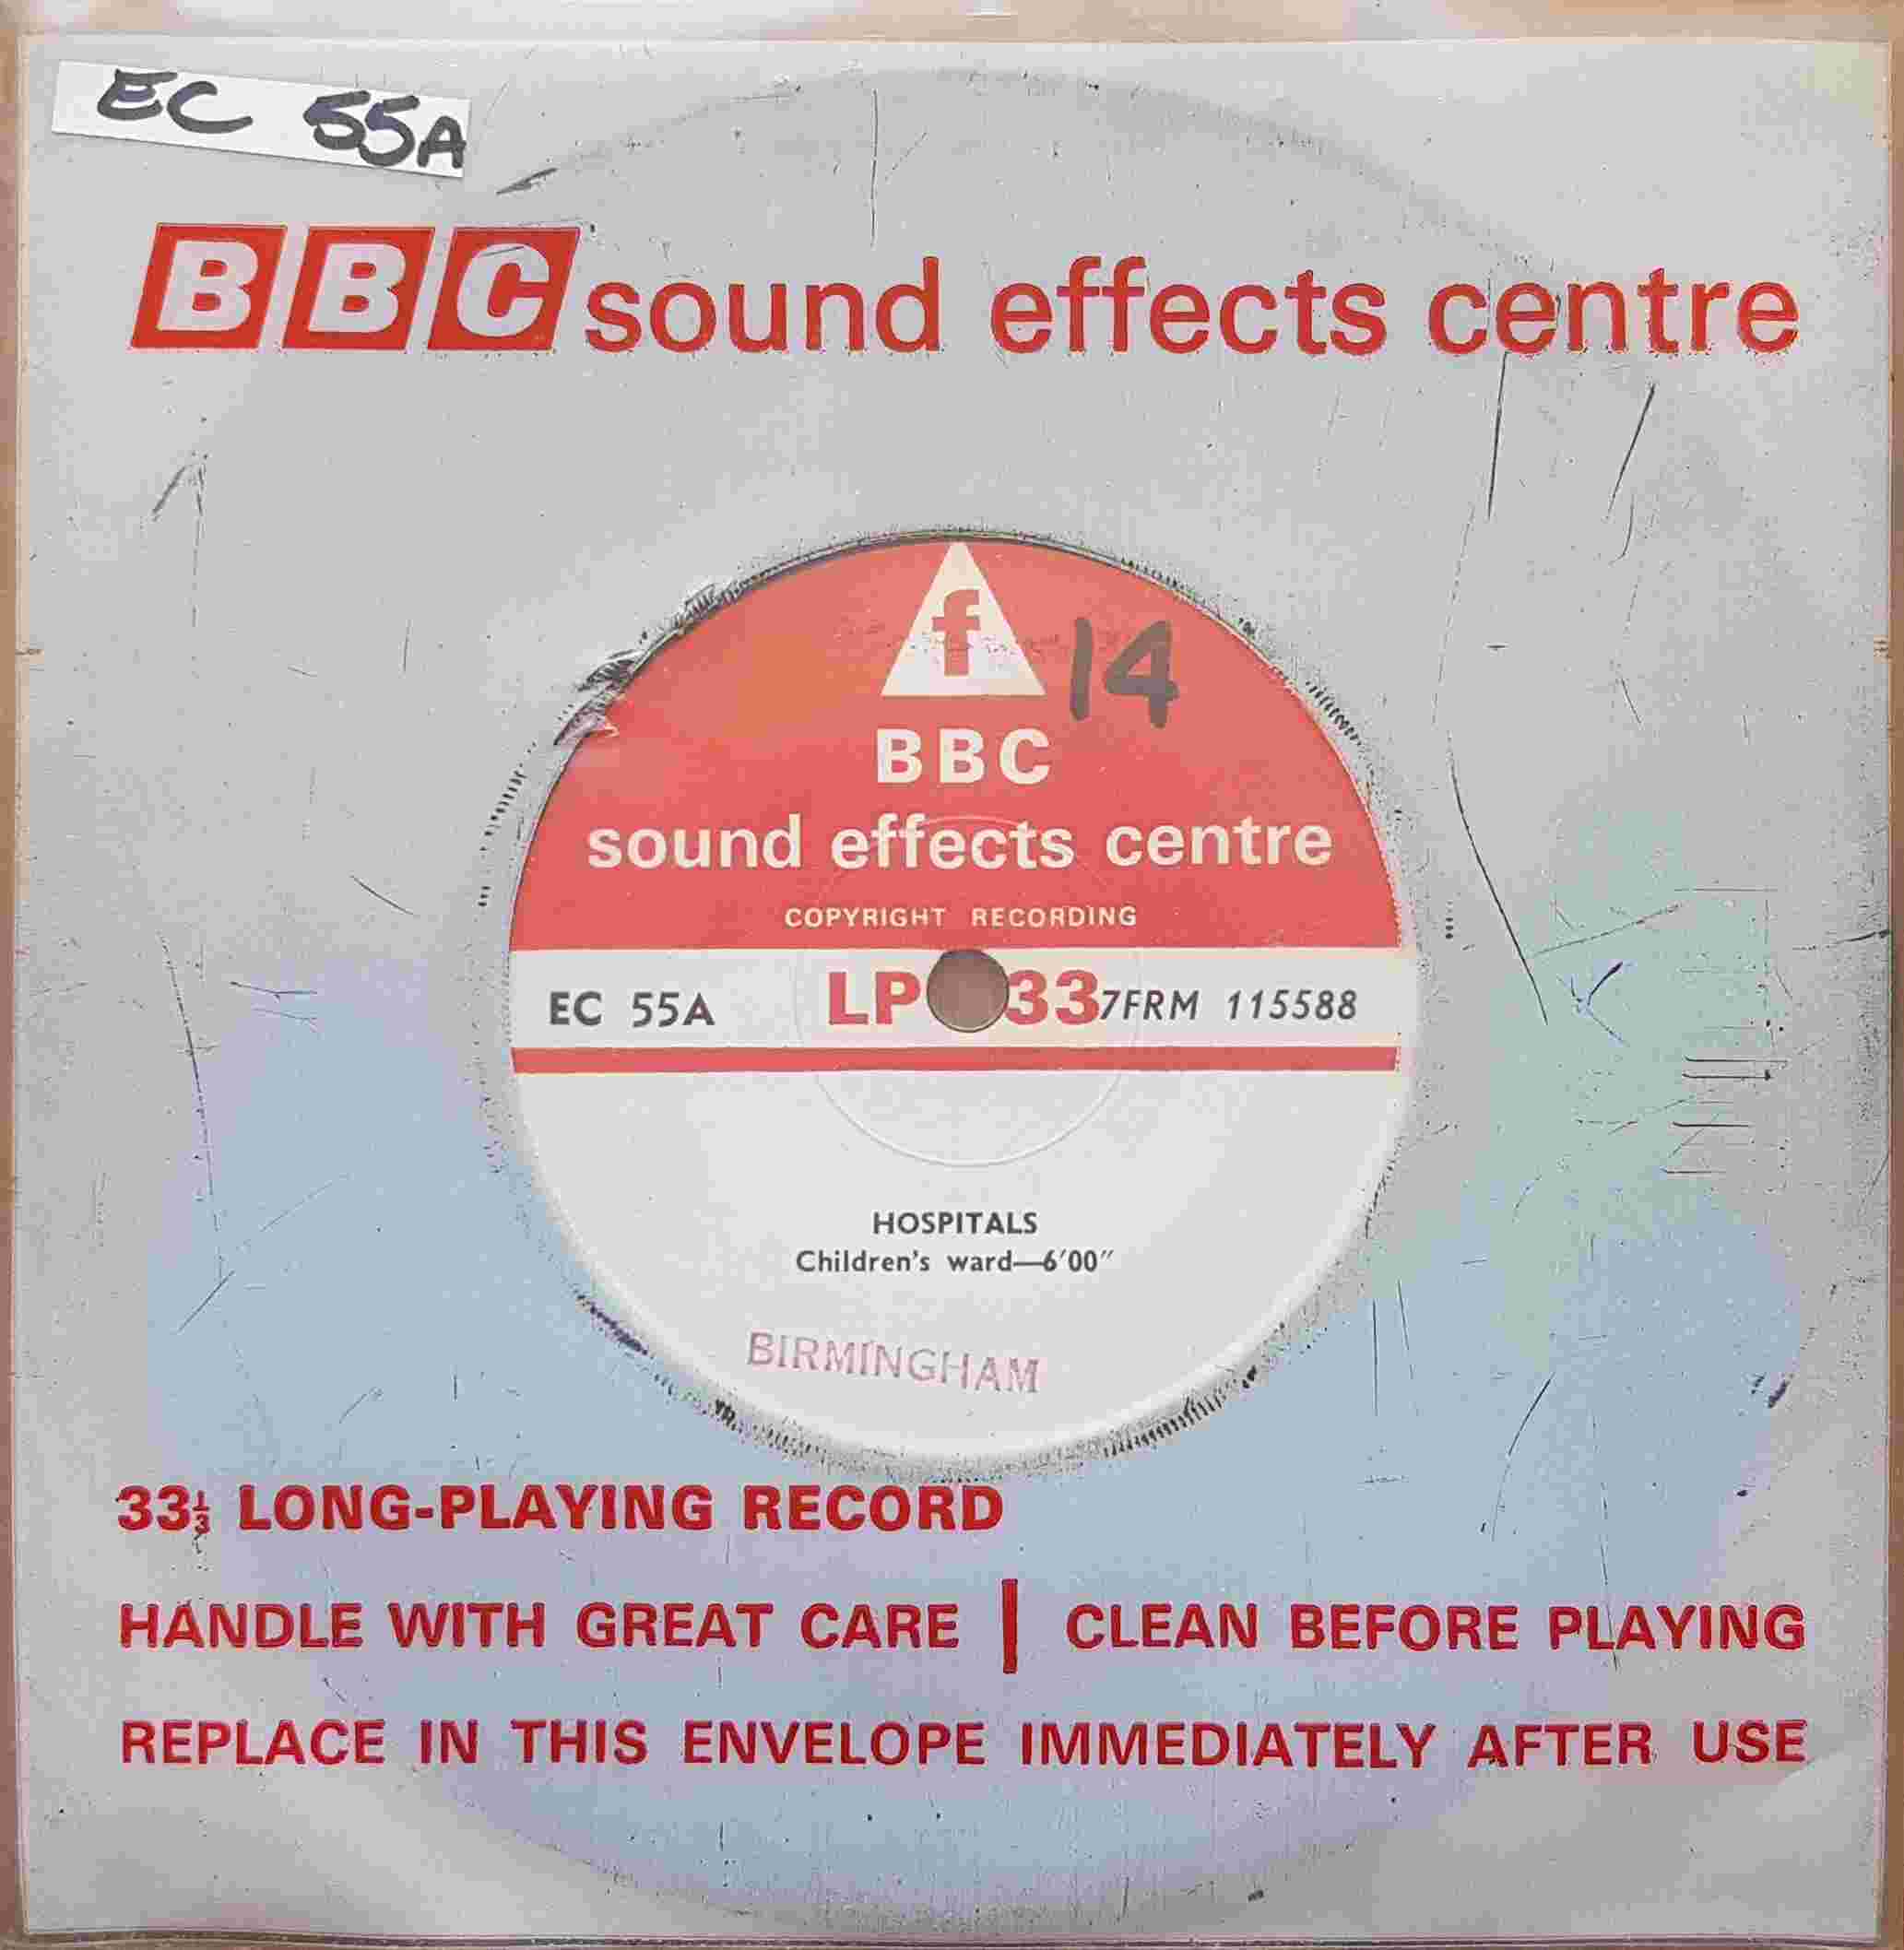 Picture of EC 55A Hospitals by artist Not registered from the BBC records and Tapes library